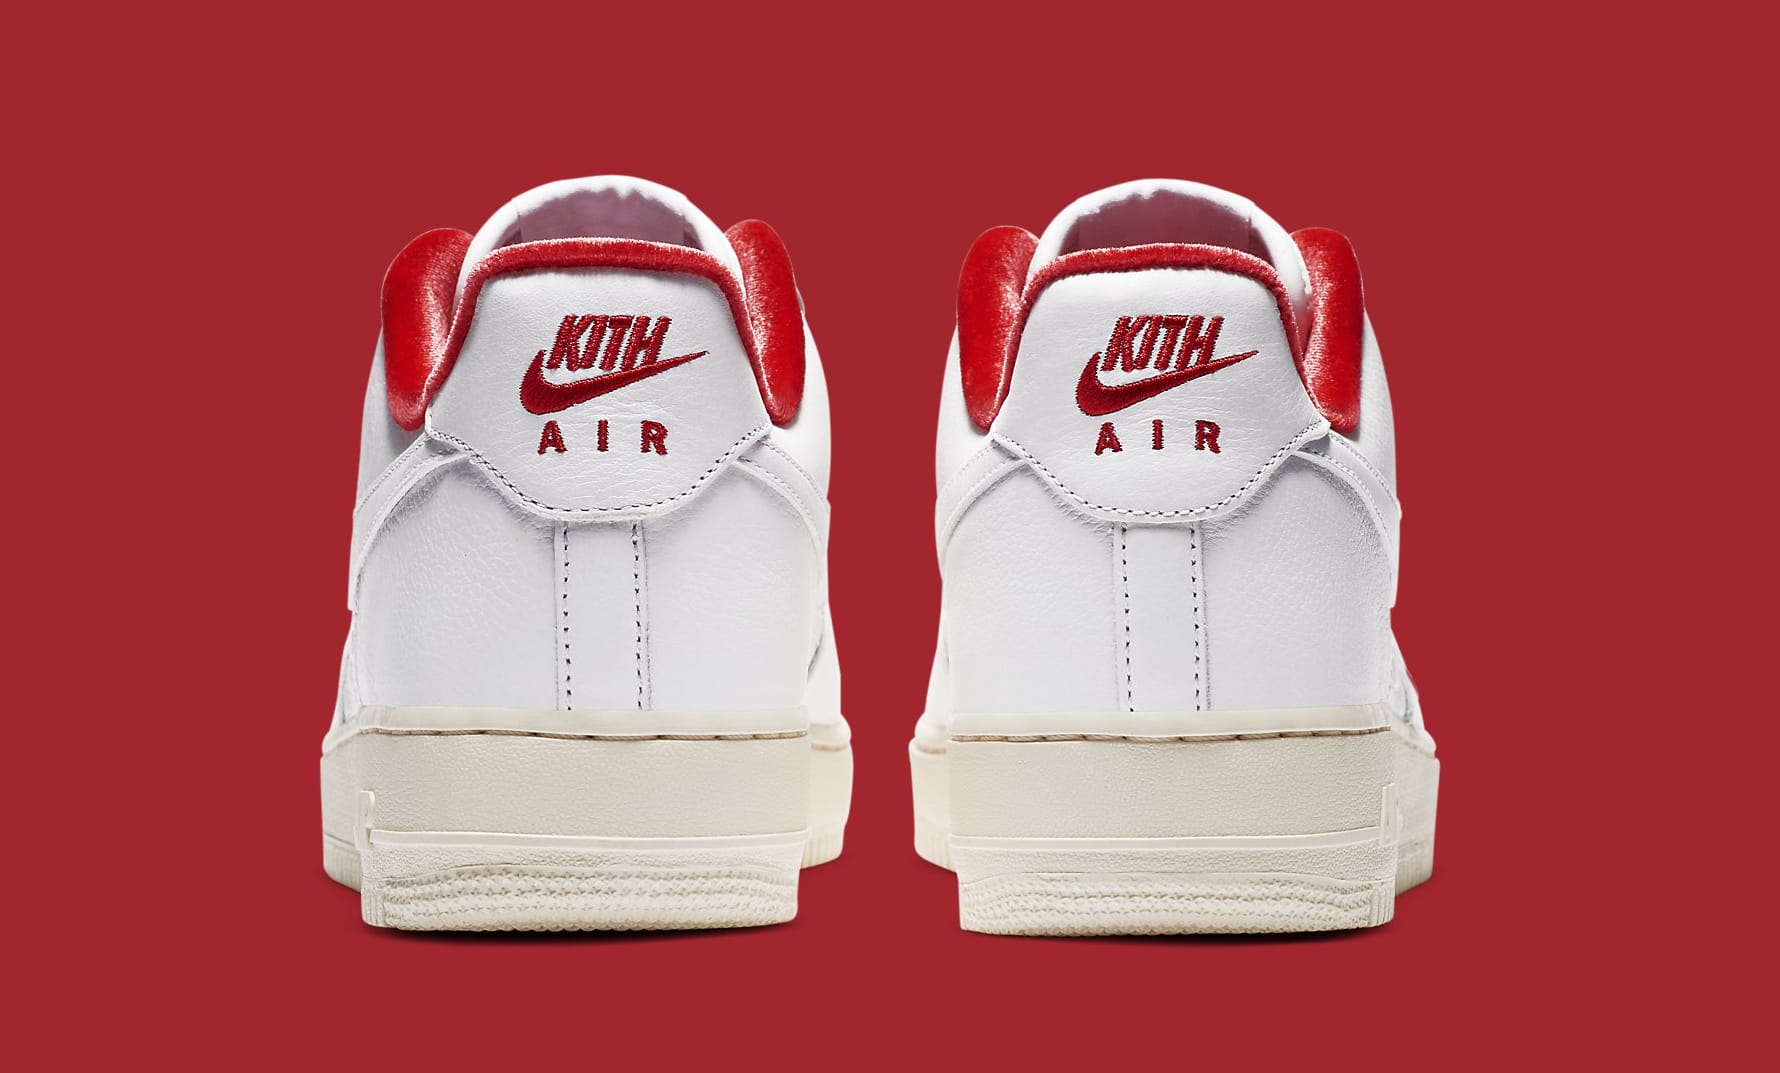 Kith x Nike Air Force 1 Low Collab Officially Unveiled: Photos